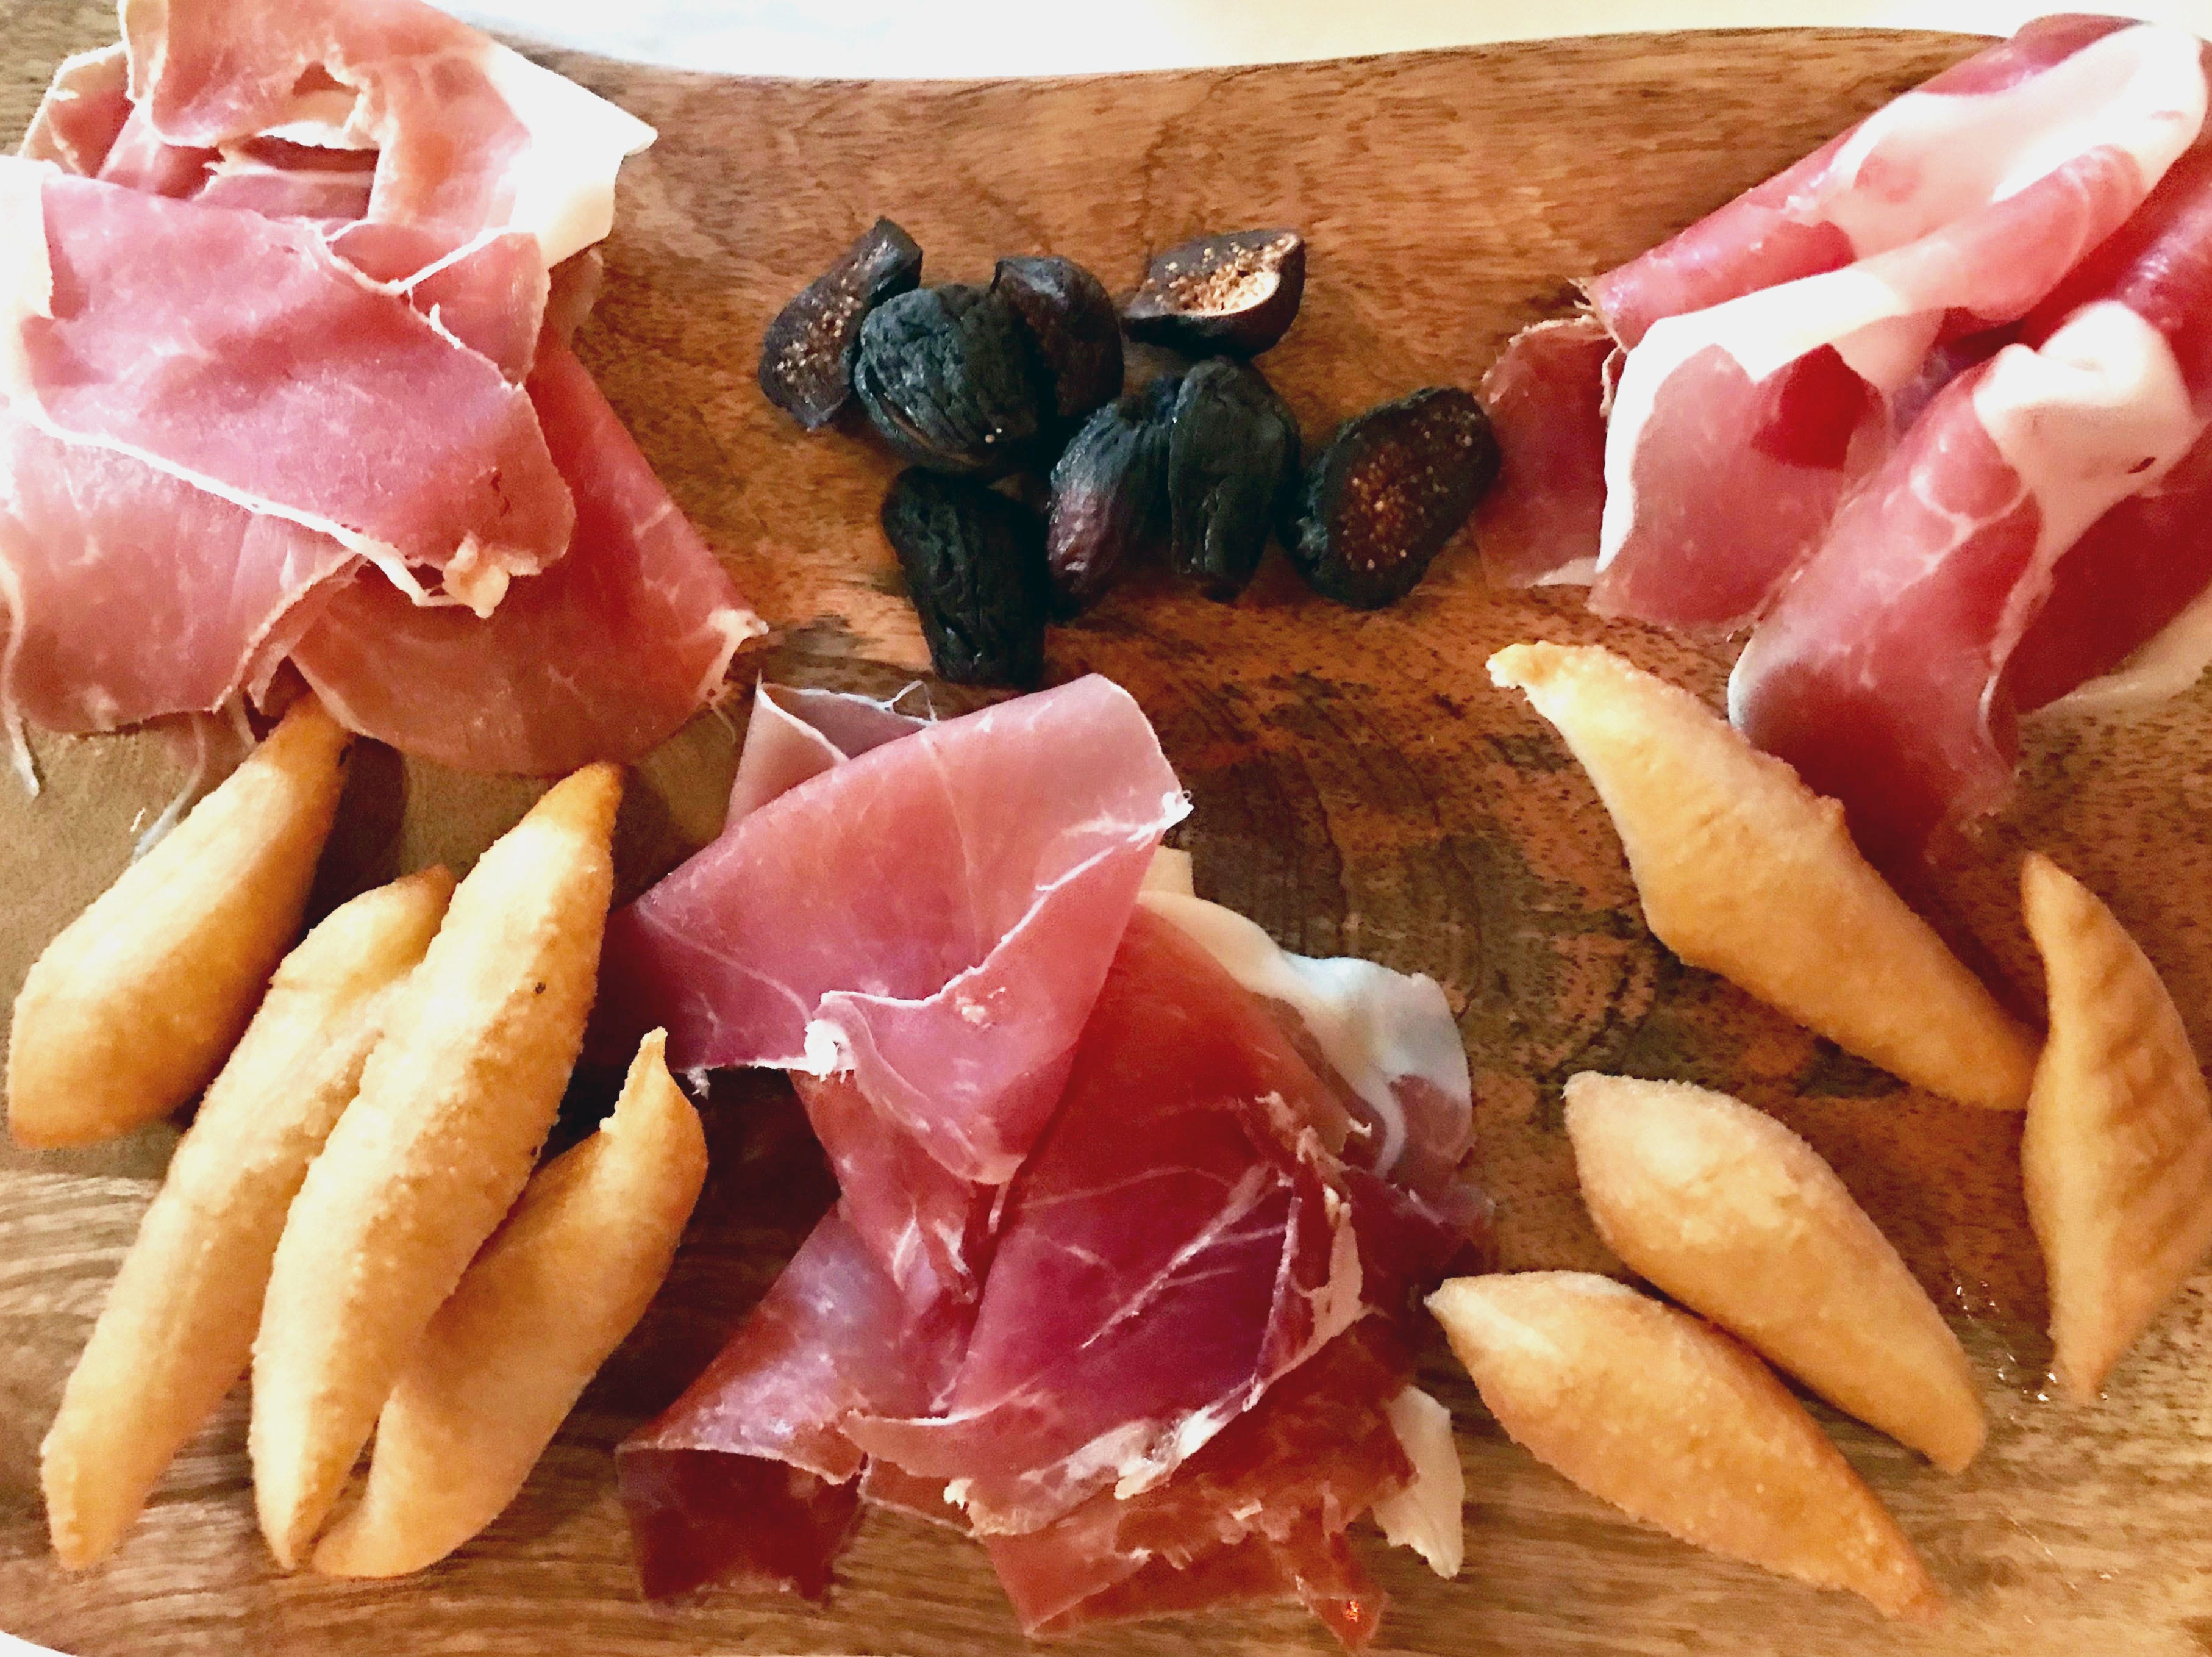 Antipasti at Ristorante Bartolotta in Wauwatosa included a board of three types of prosciutto with dried figs and gnocco fritto, little fried breads.